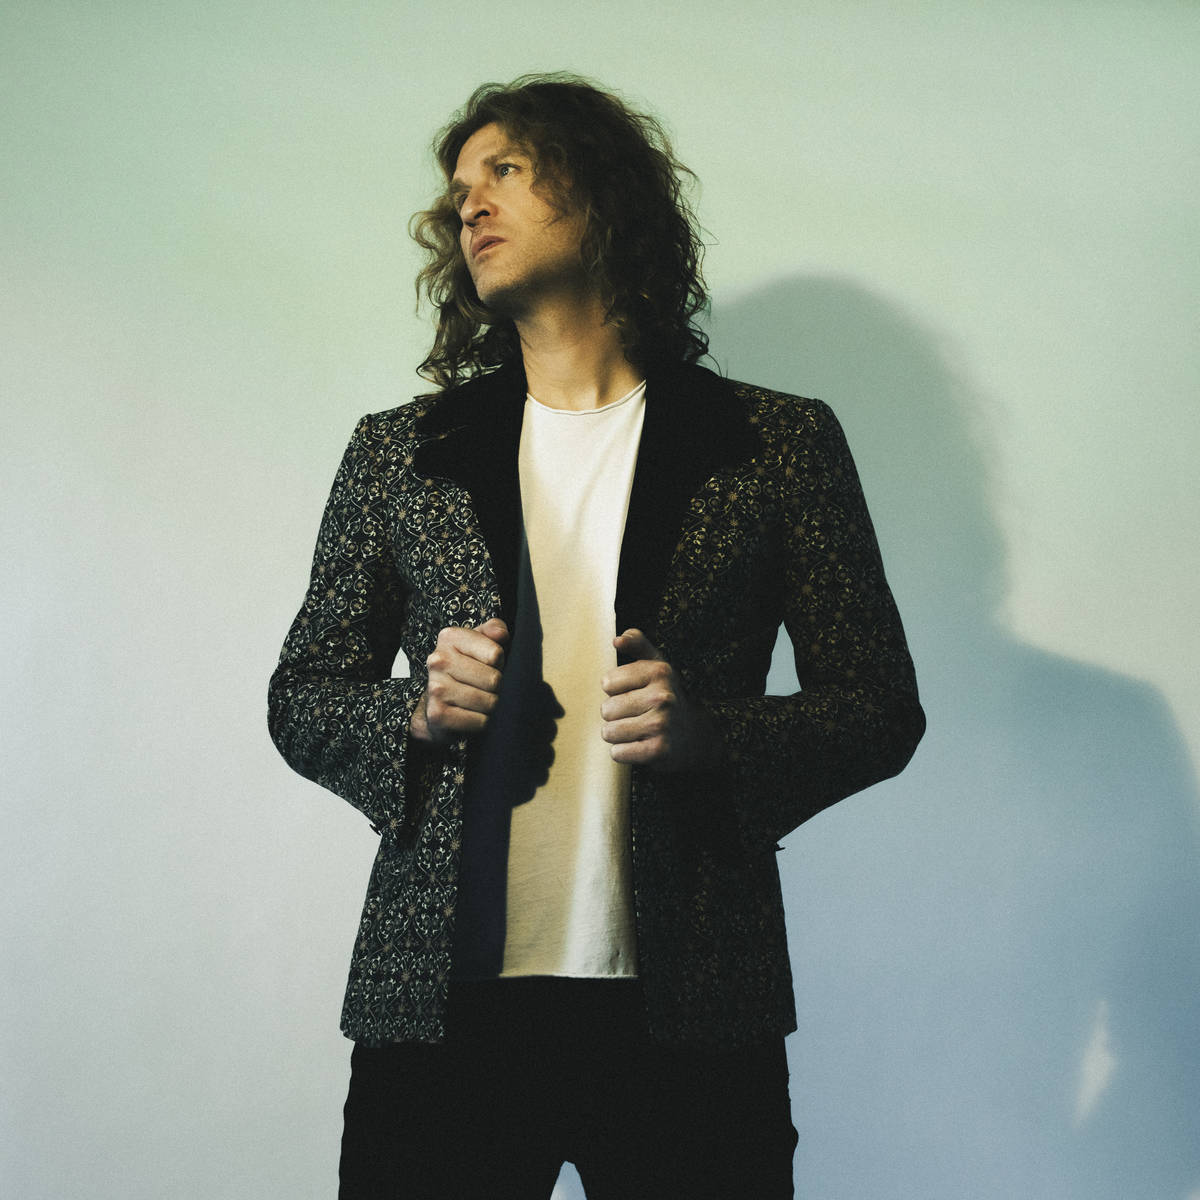 Dave Keuning once again recorded his latest solo album in his home studio. (Dana Trippe)